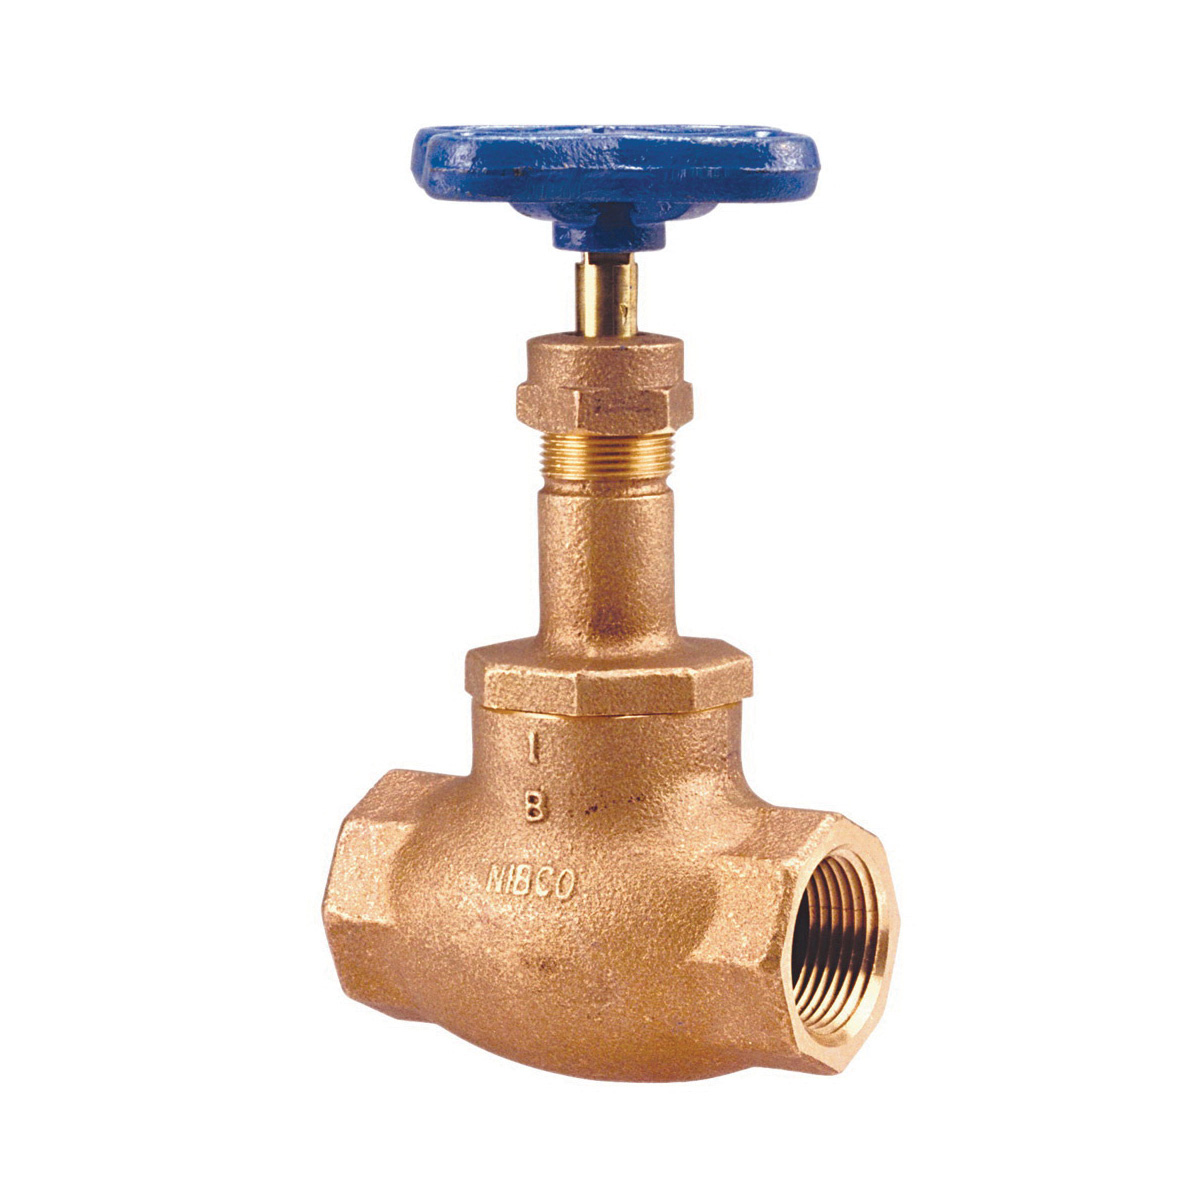 NIBCO® NL2K00D T-211-Y Globe Valve, 2 in Nominal, FNPT End Style, 125 lb, Bronze Body, Hand Wheel Actuator, Domestic